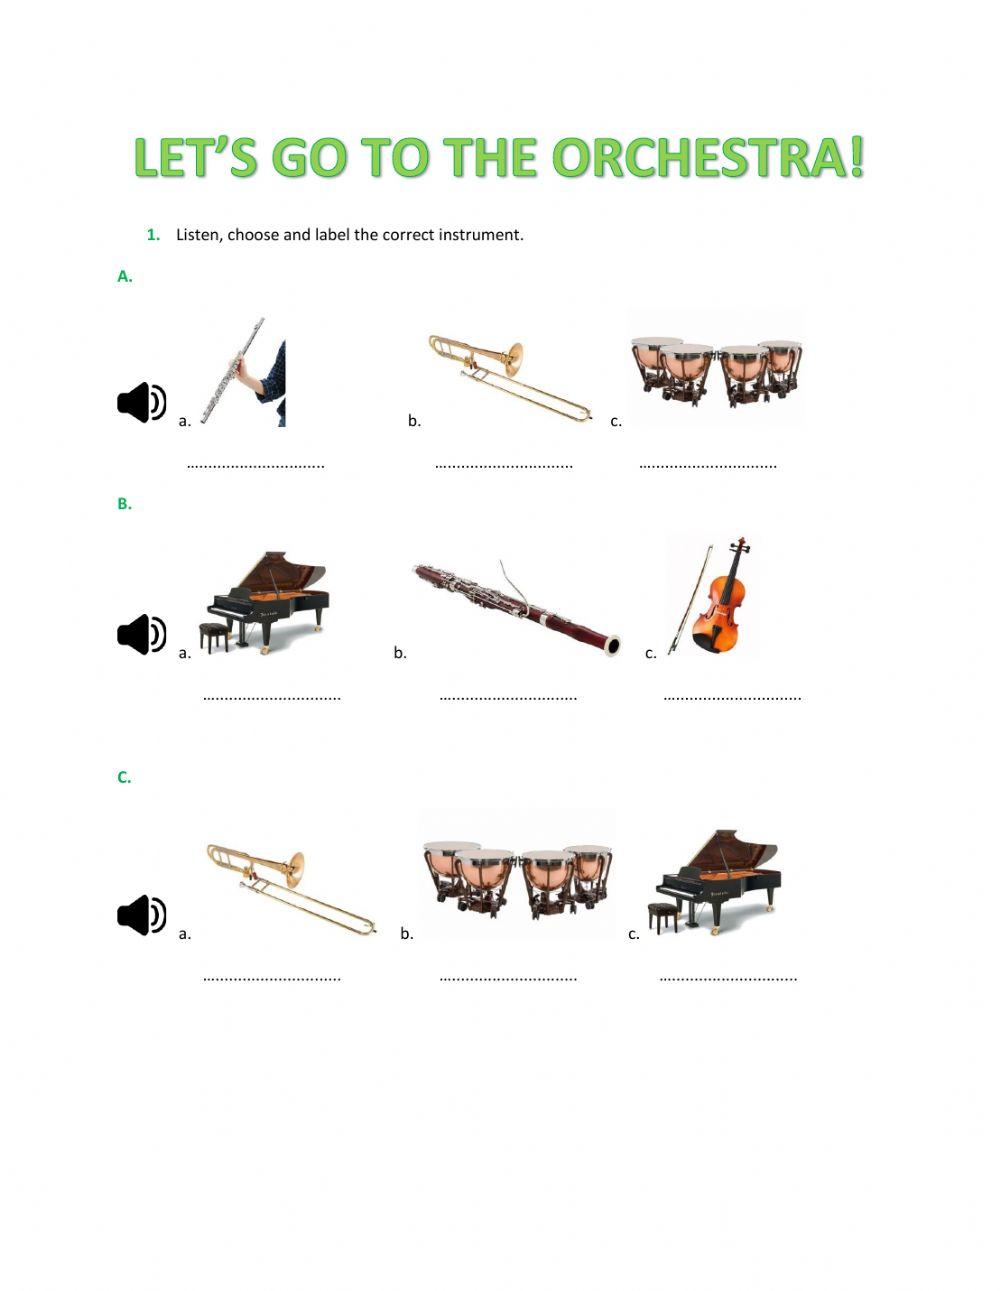 Let's go to the orchestra!